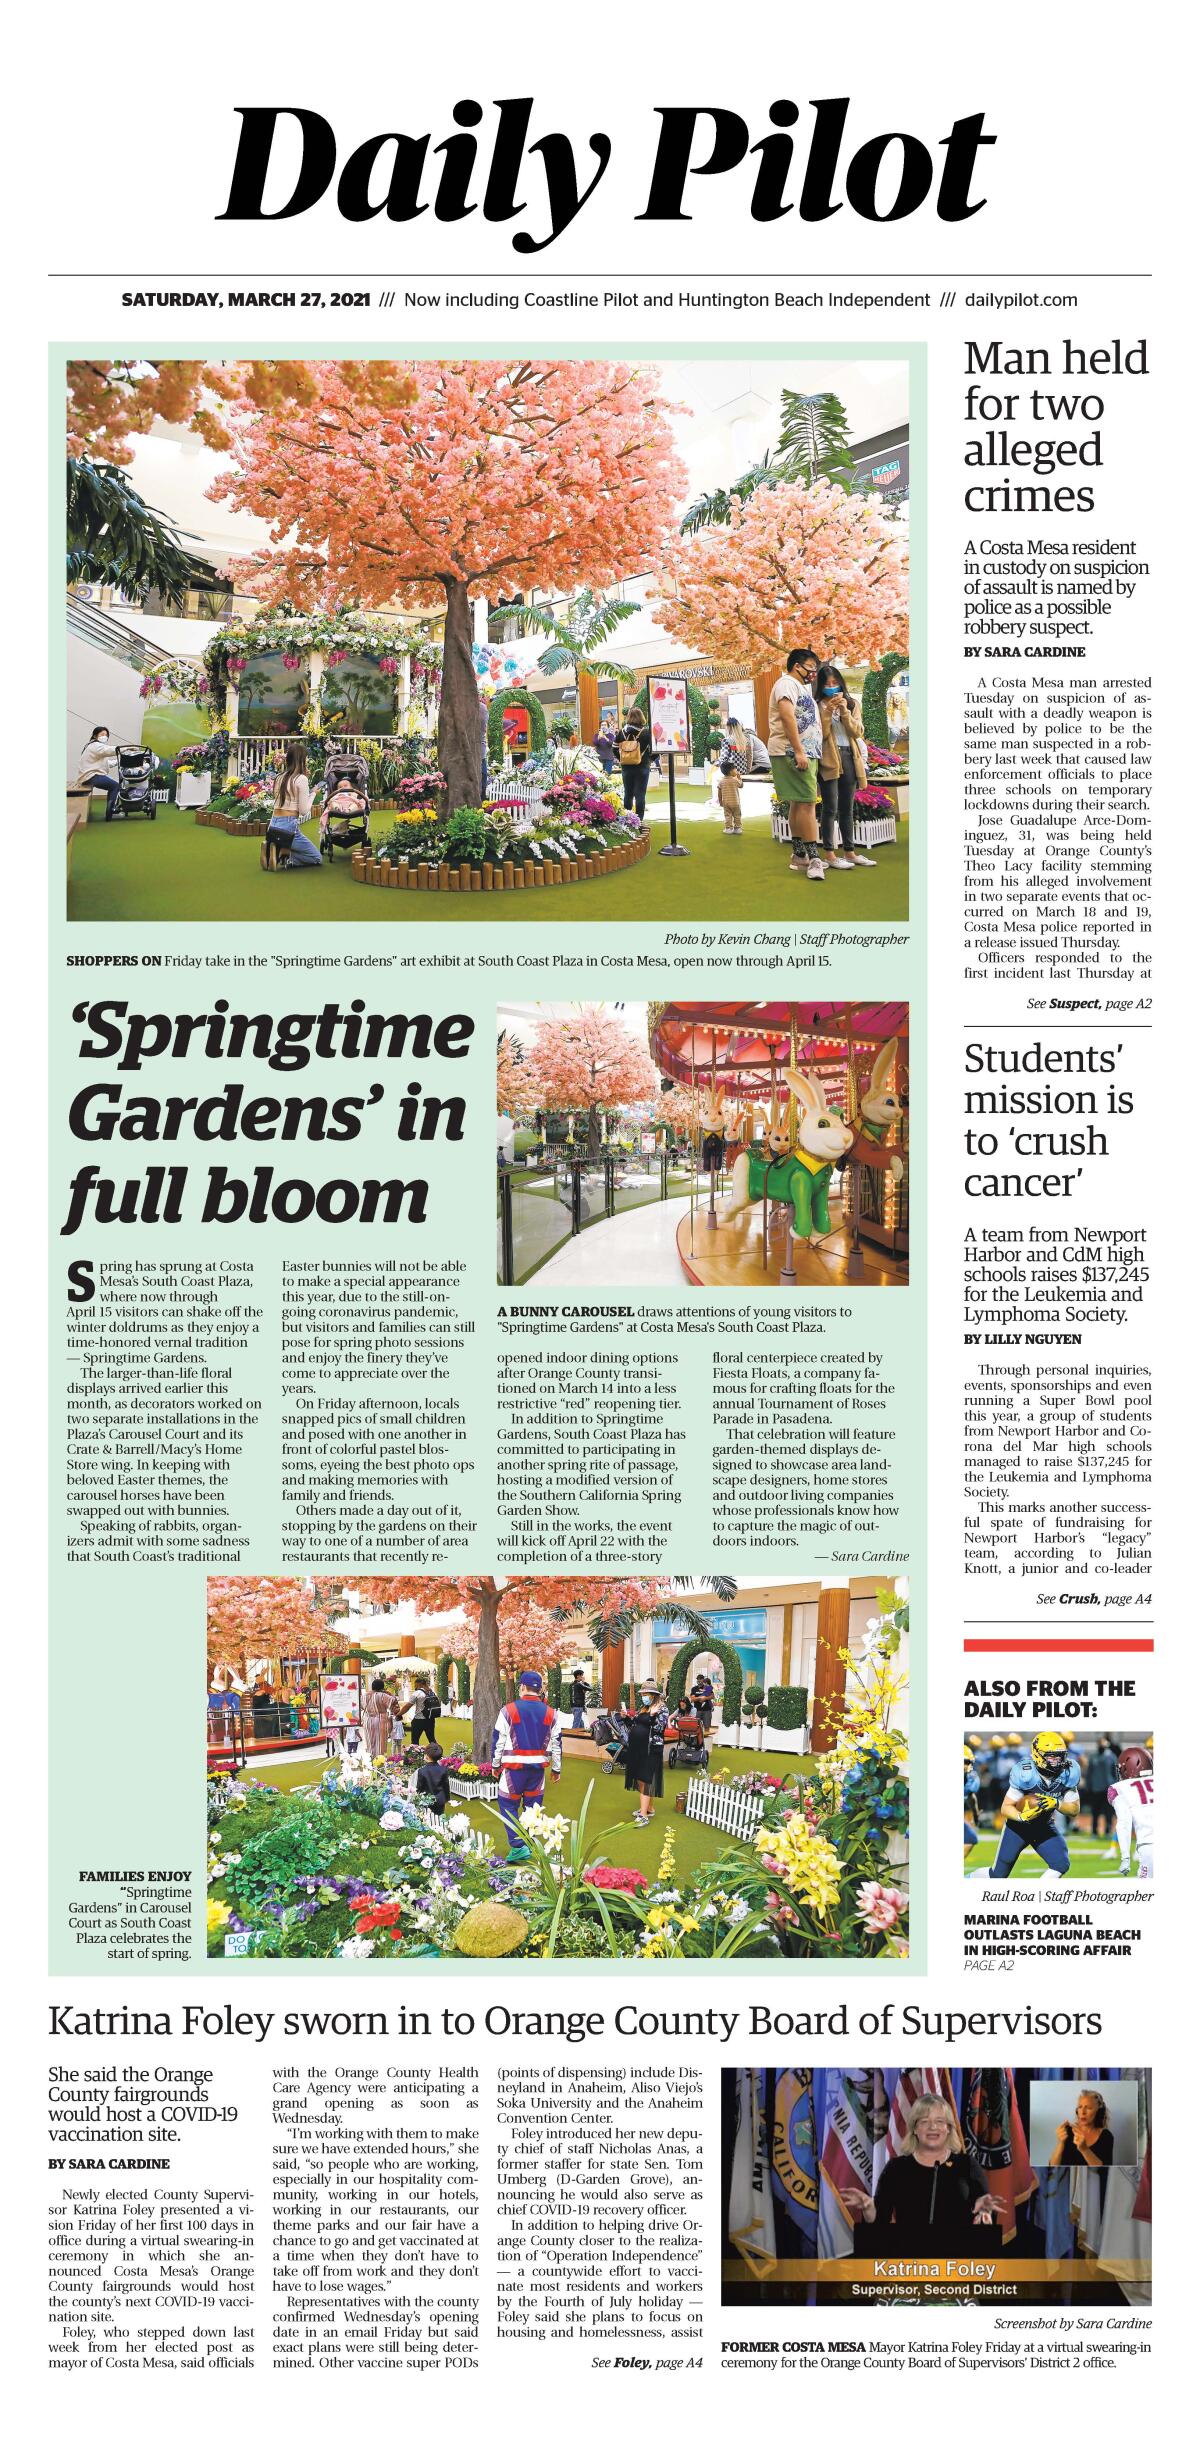 Front page of Daily Pilot e-newspaper for Saturday, March 27, 2021.